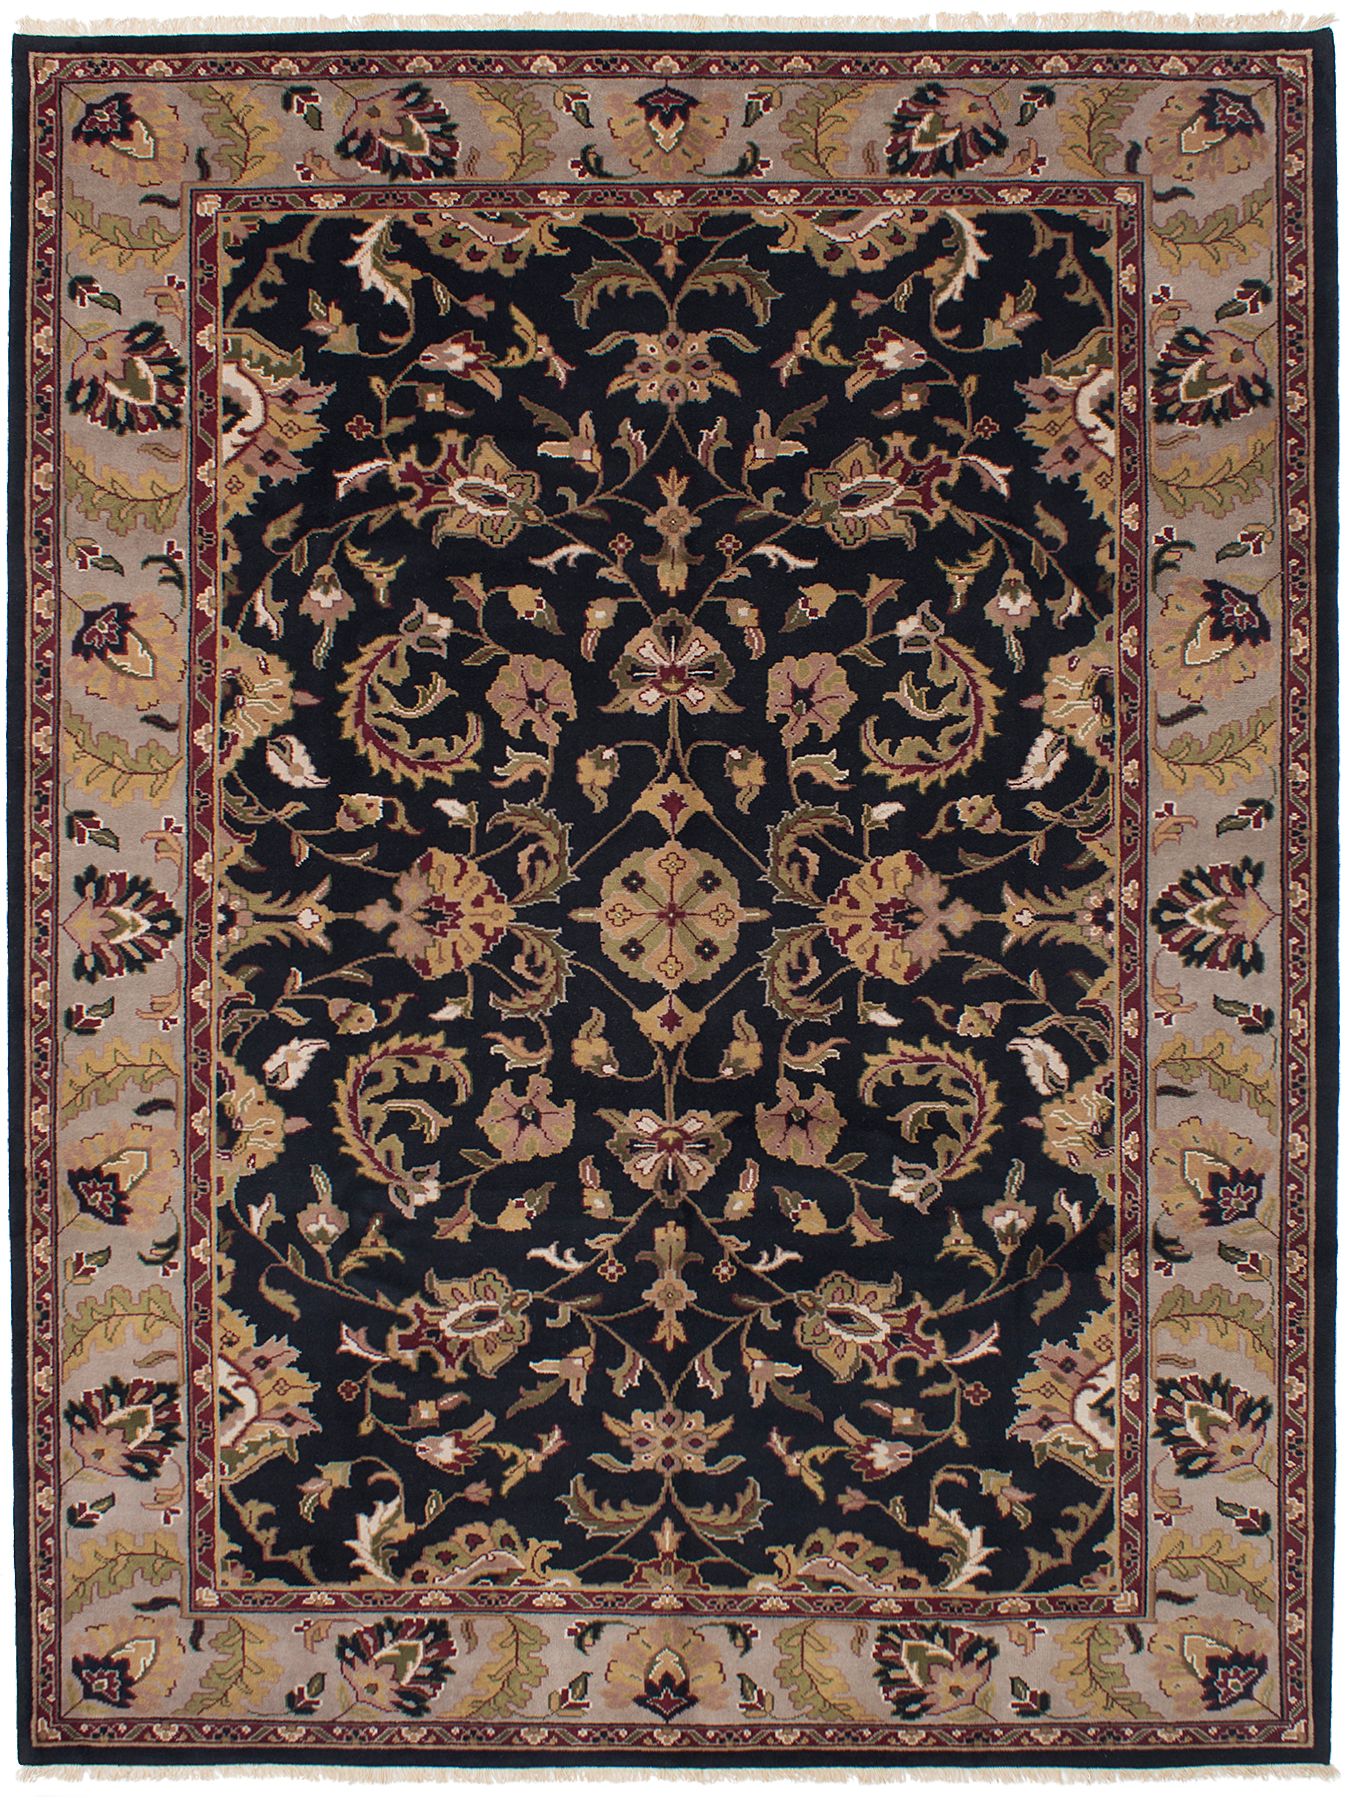 Hand-knotted Finest Agra Jaipur Black Wool Rug 8'6" x 11'6"  Size: 8'6" x 11'6"  